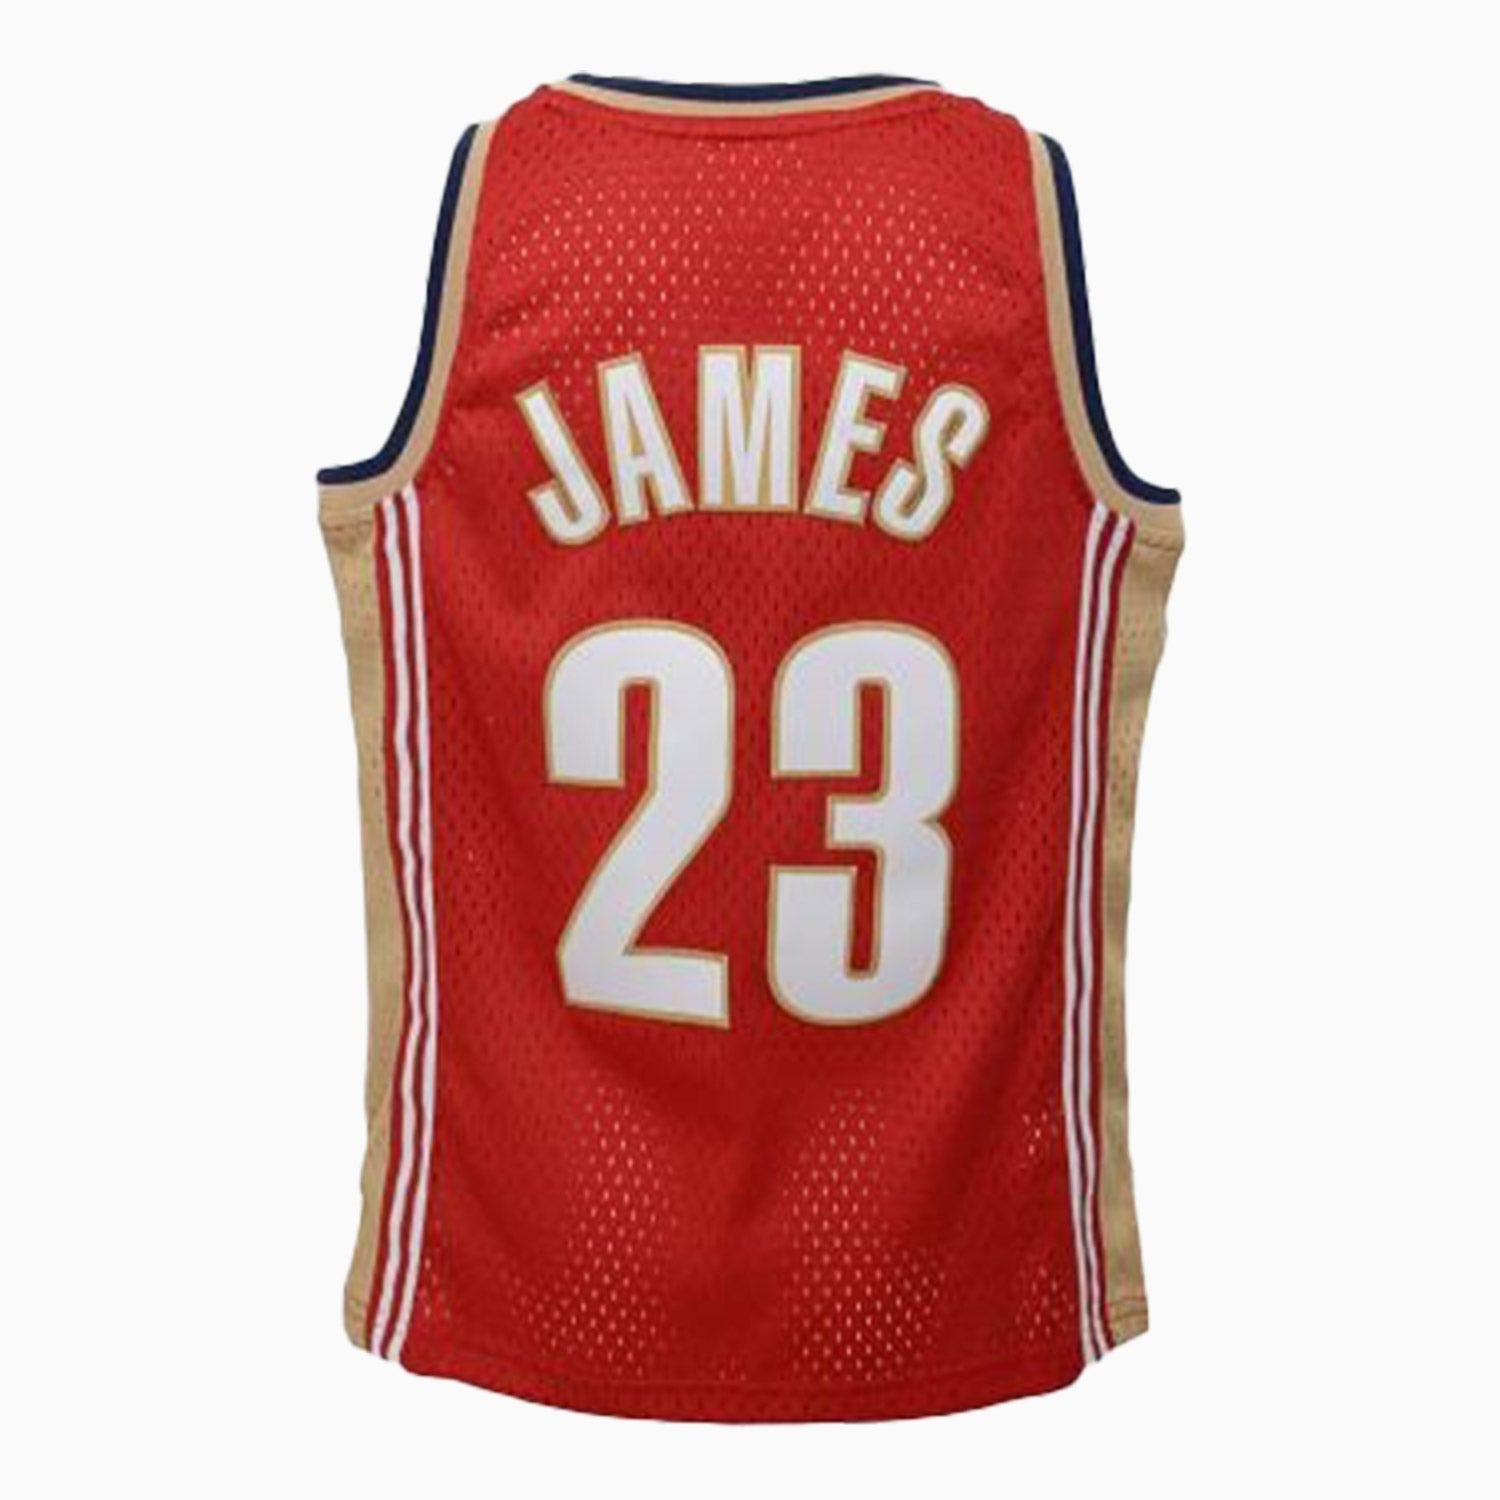 mitchell-and-ness-swingman-lebron-james-cleveland-cavaliers-2003-04-nba-jersey-youth-9n2b7brd0-cavlj-y03